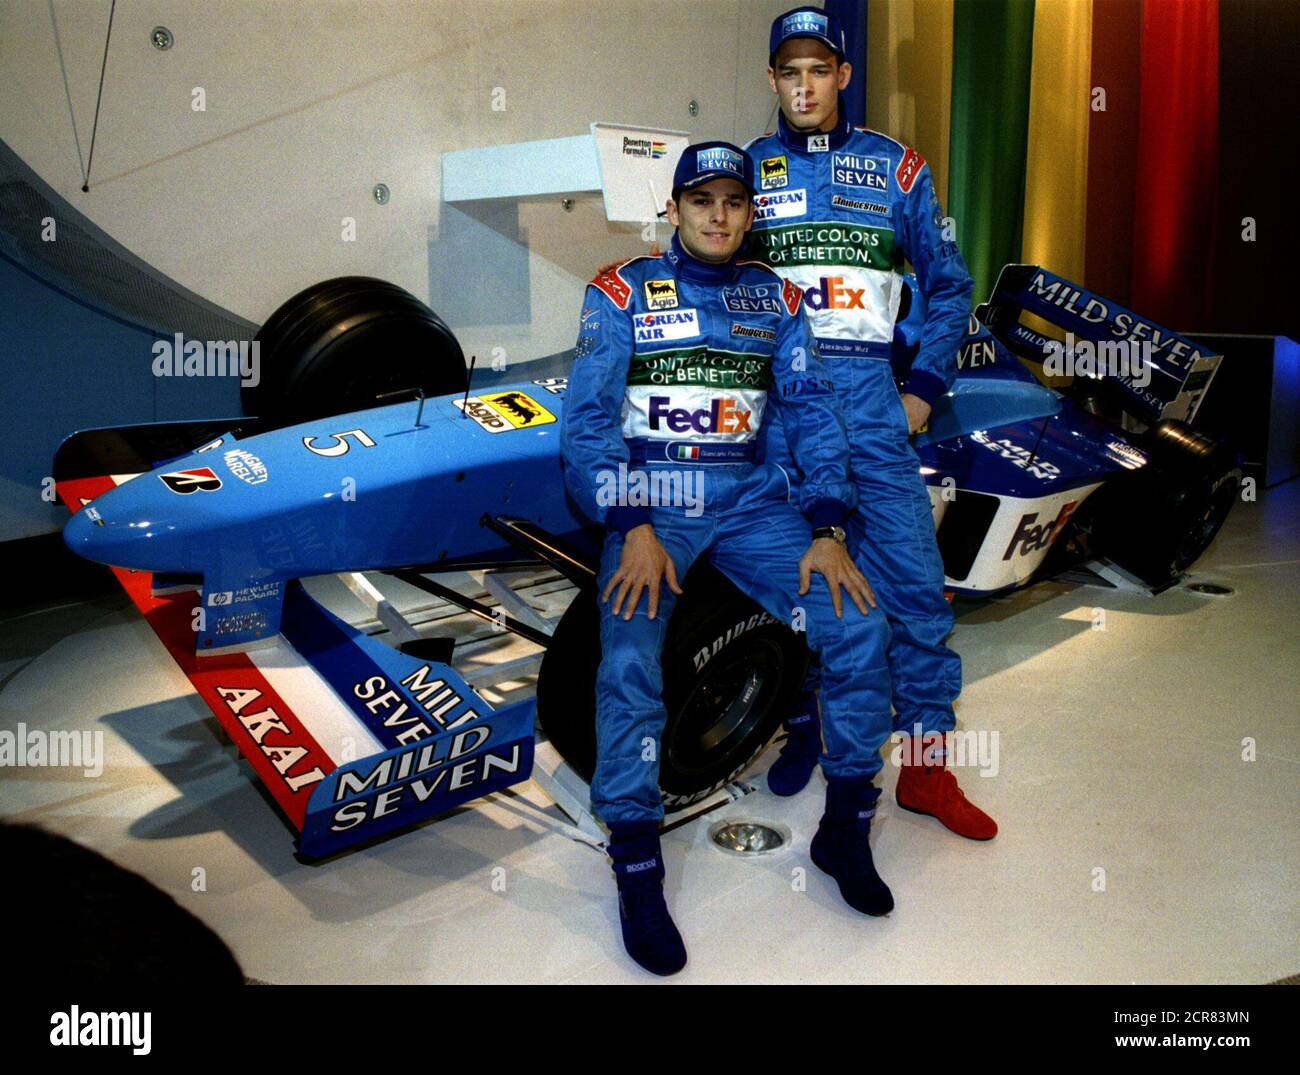 Benetton Launch High Resolution Stock Photography and Images - Alamy